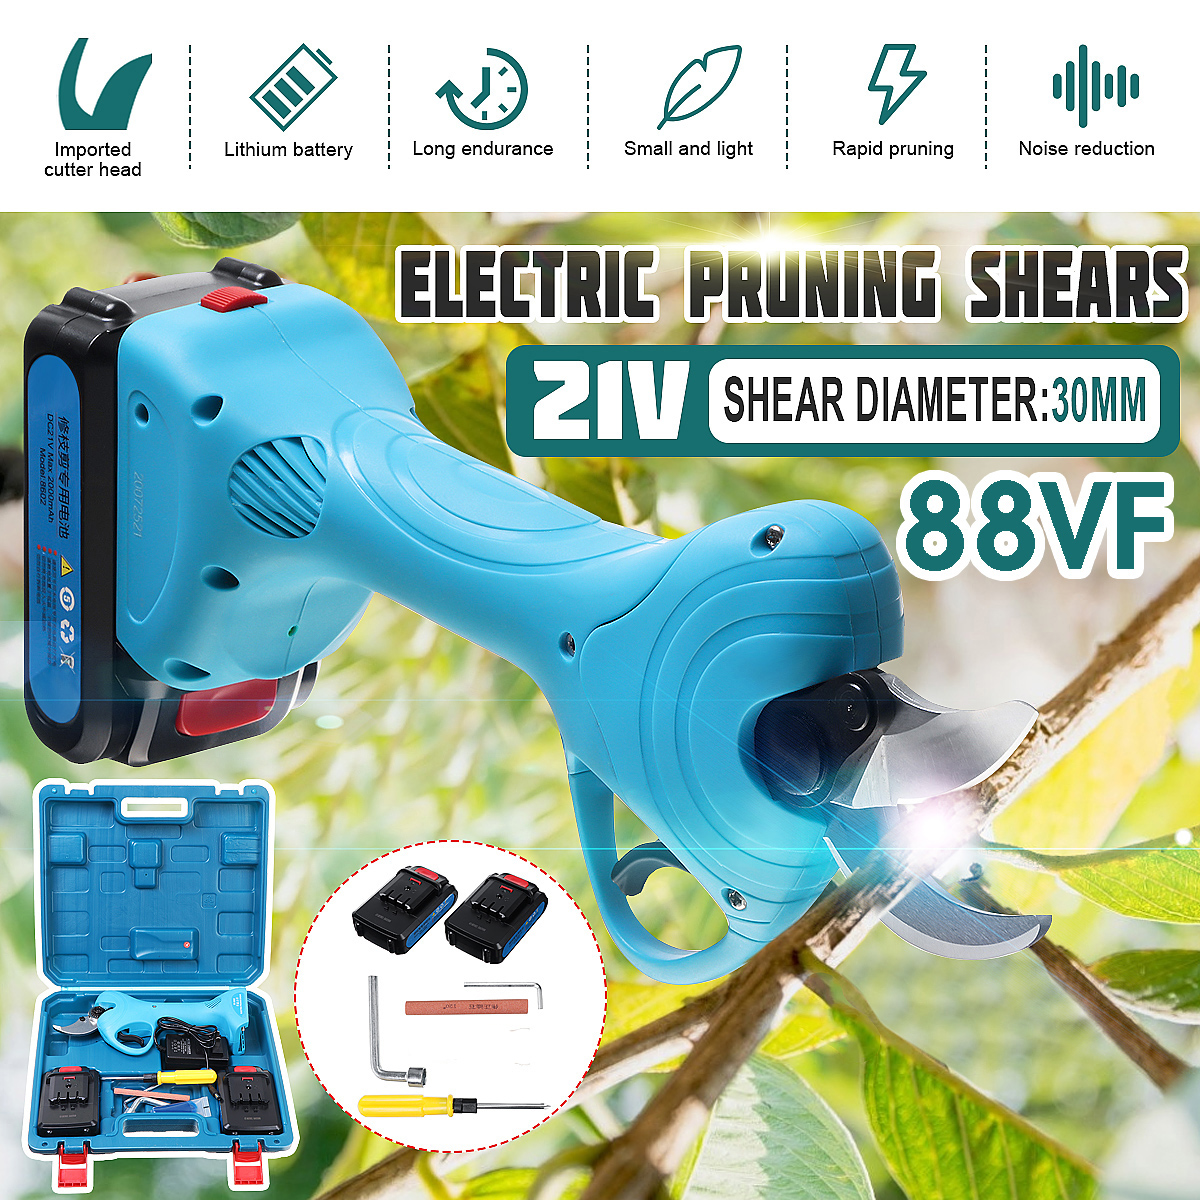 21V-30mm-Electric-Pruning-Scissors-Branch-Cutter-Garden-Tool-With-2-Rechargeable-Battery-1753357-1